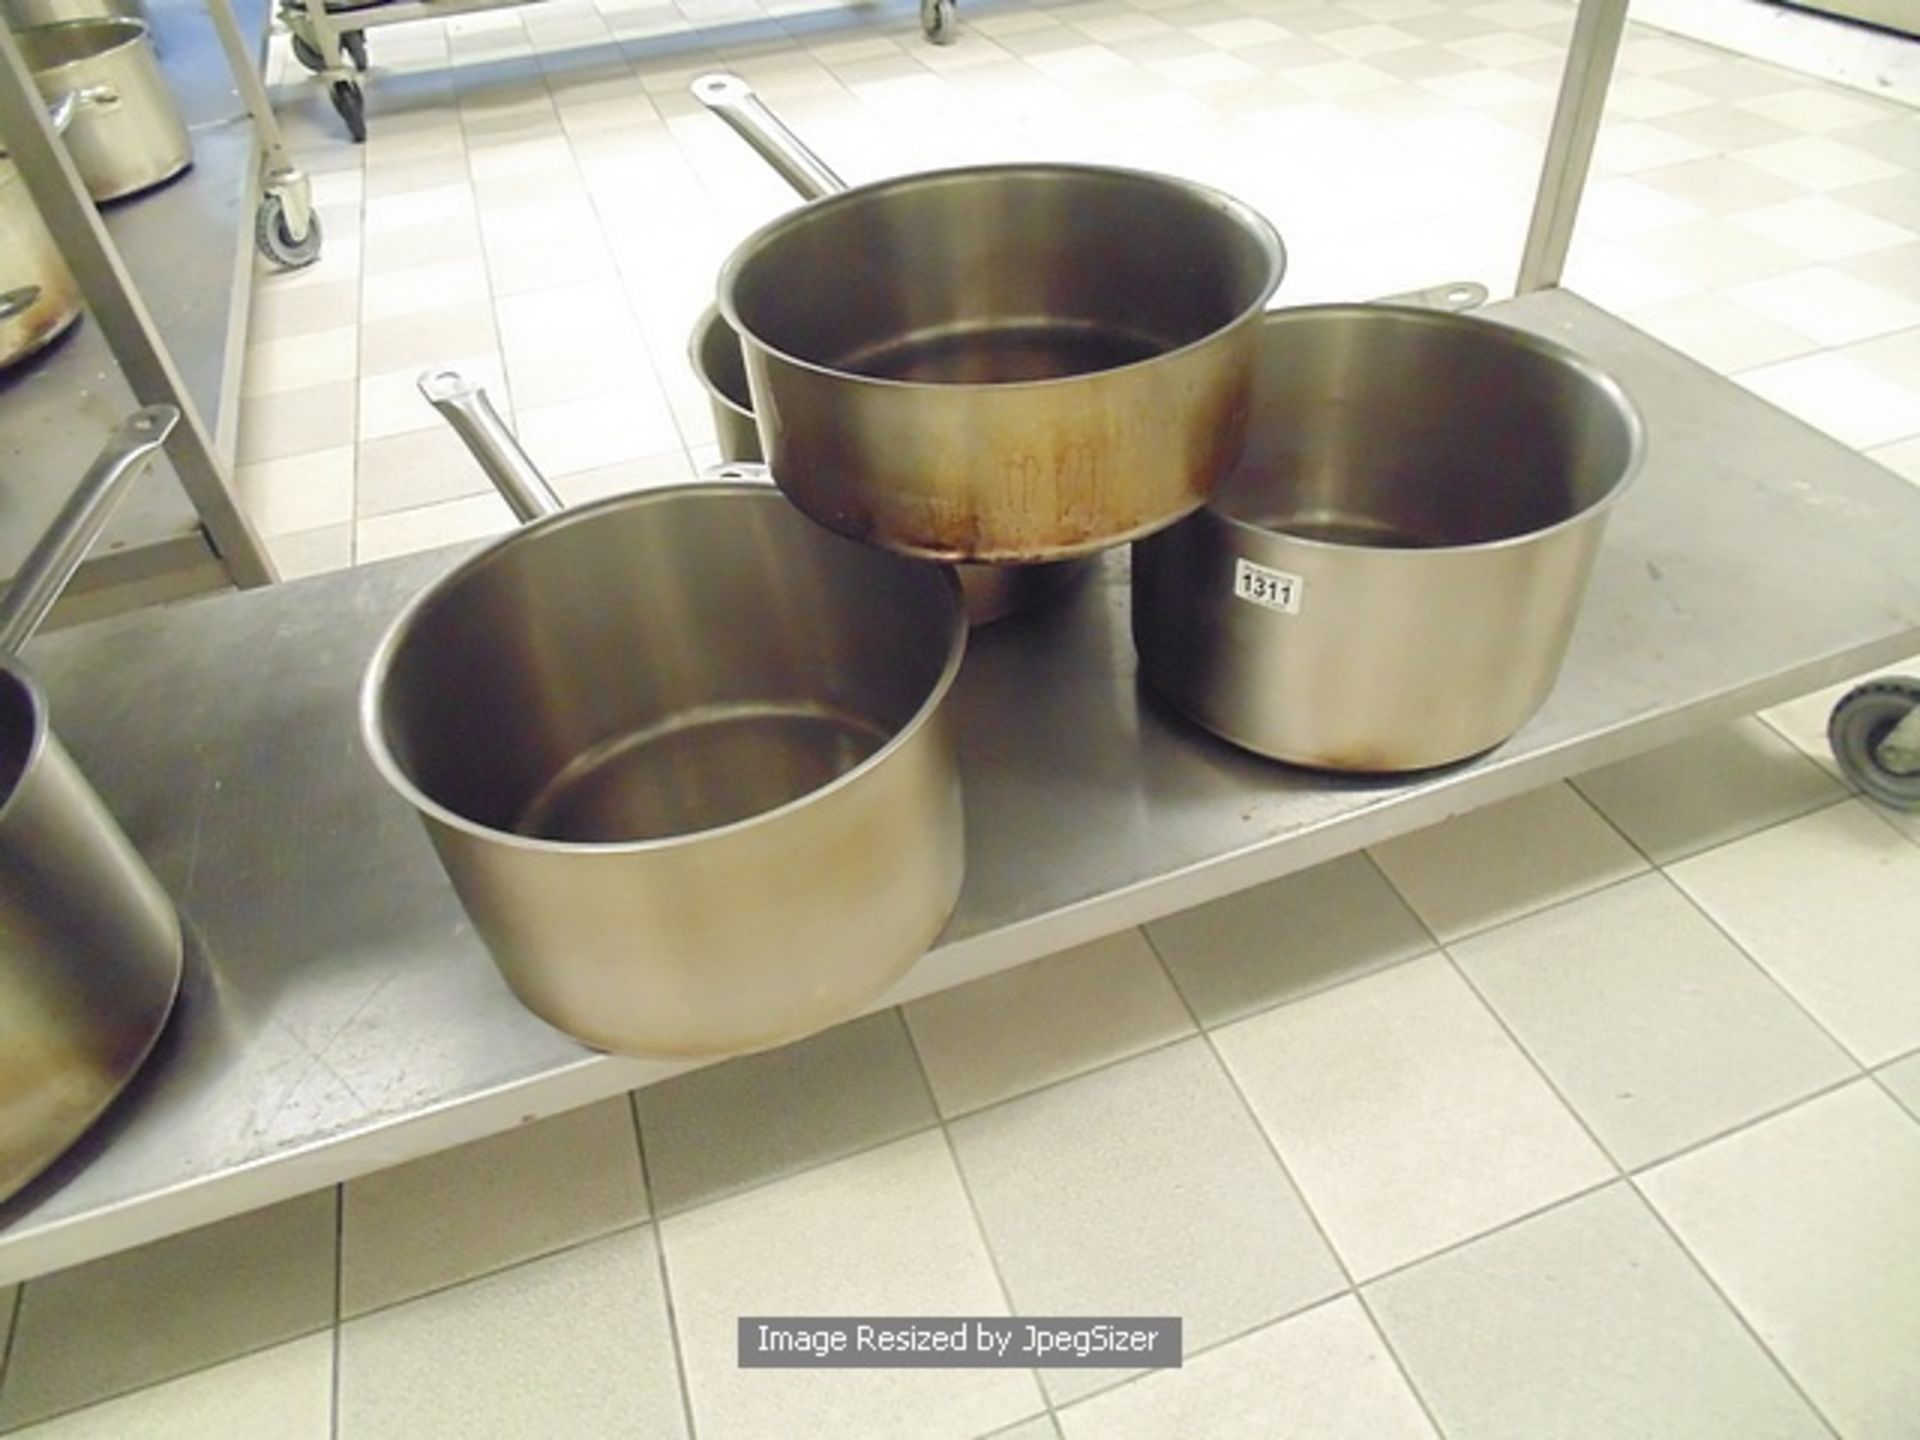 3 x Lagor stainless steel long handle saucepans 3 x 12.5 litre 300mm x 180mm and 1 x 8 litre 300mm x